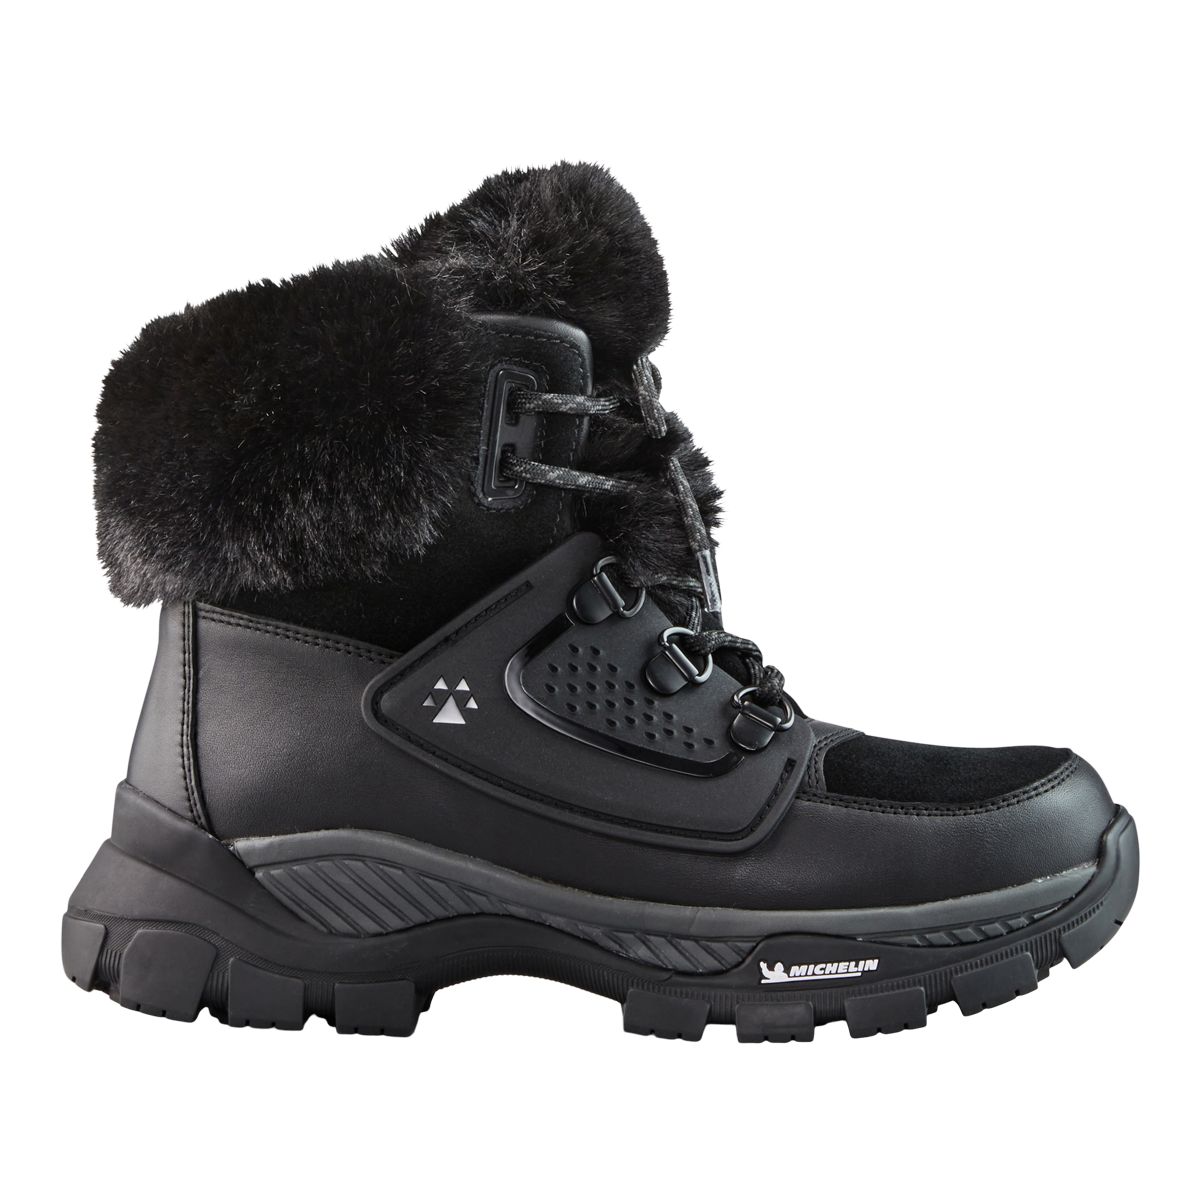 Image of Cougar Women's Union Waterproof Insulated Fleece-Lined Winter Boots